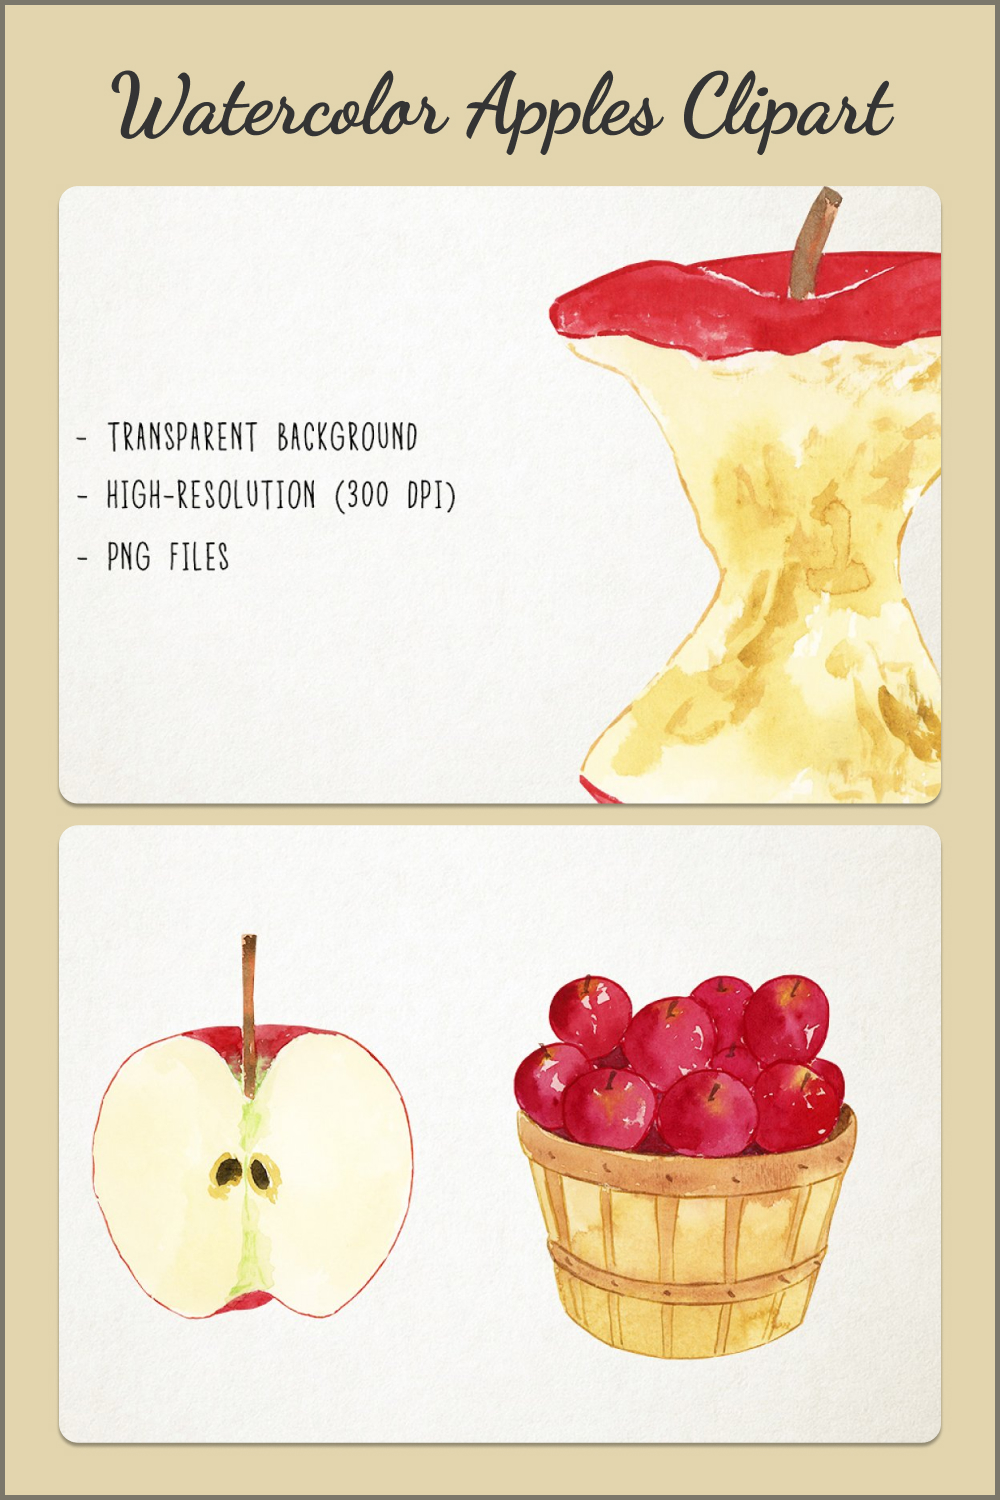 Watercolor apples clipart of pinterest.